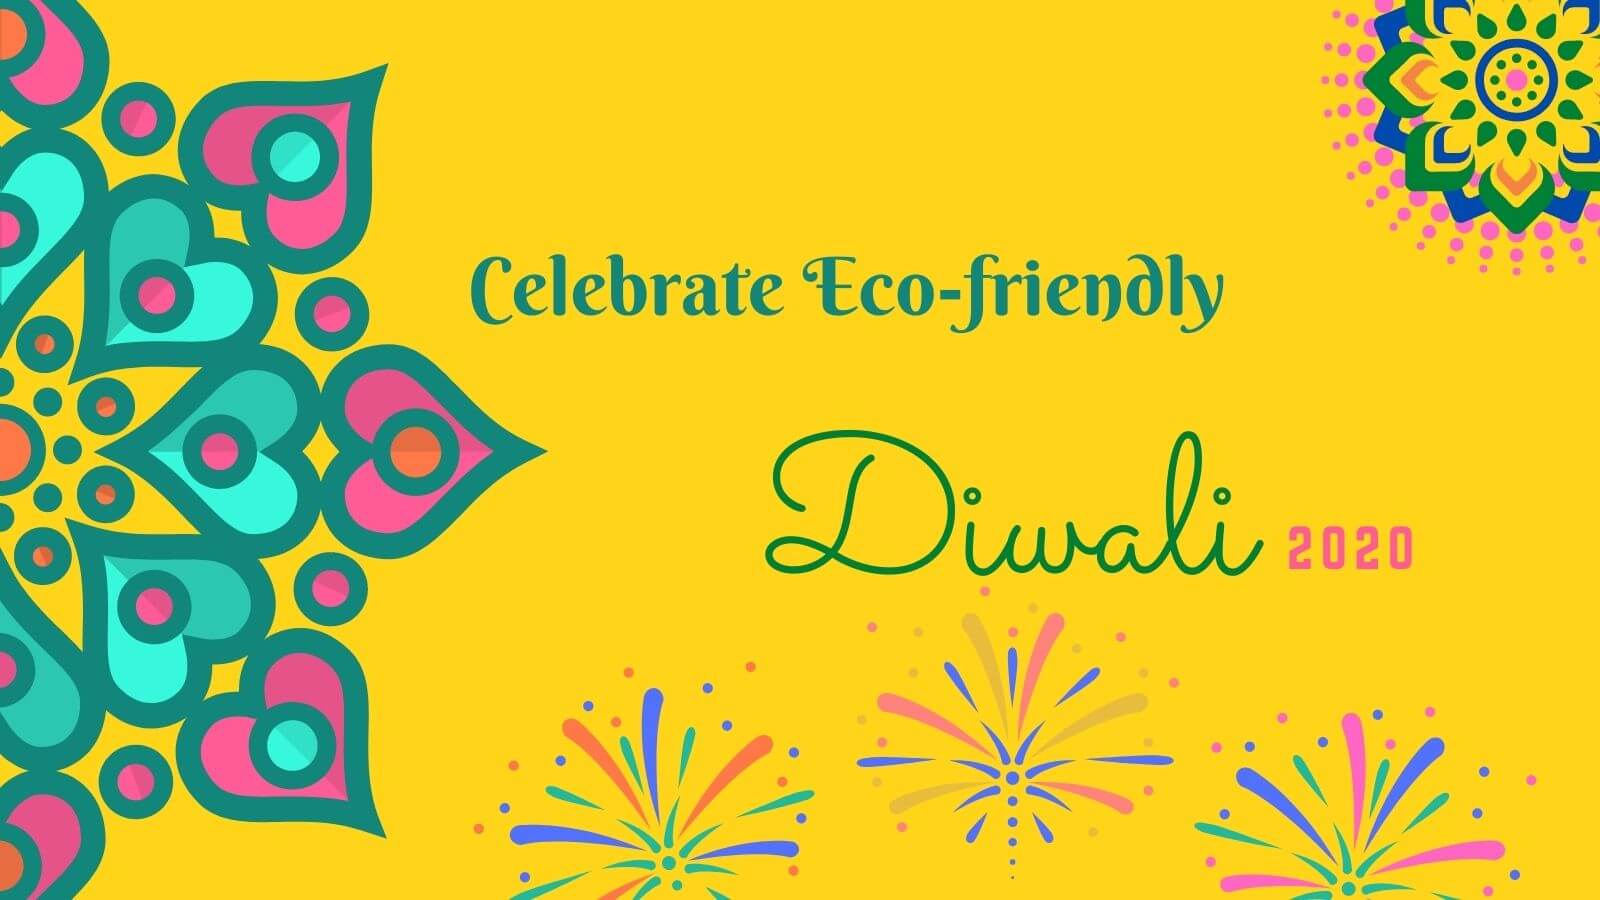 During the Diwali Celebration, one thing that gets everyone excited about is Diwali Shopping. However, Shopping means a lot of plastic bags. Let’s say ‘No’ to plastic shopping bags and use cloth bags when going out for shopping.